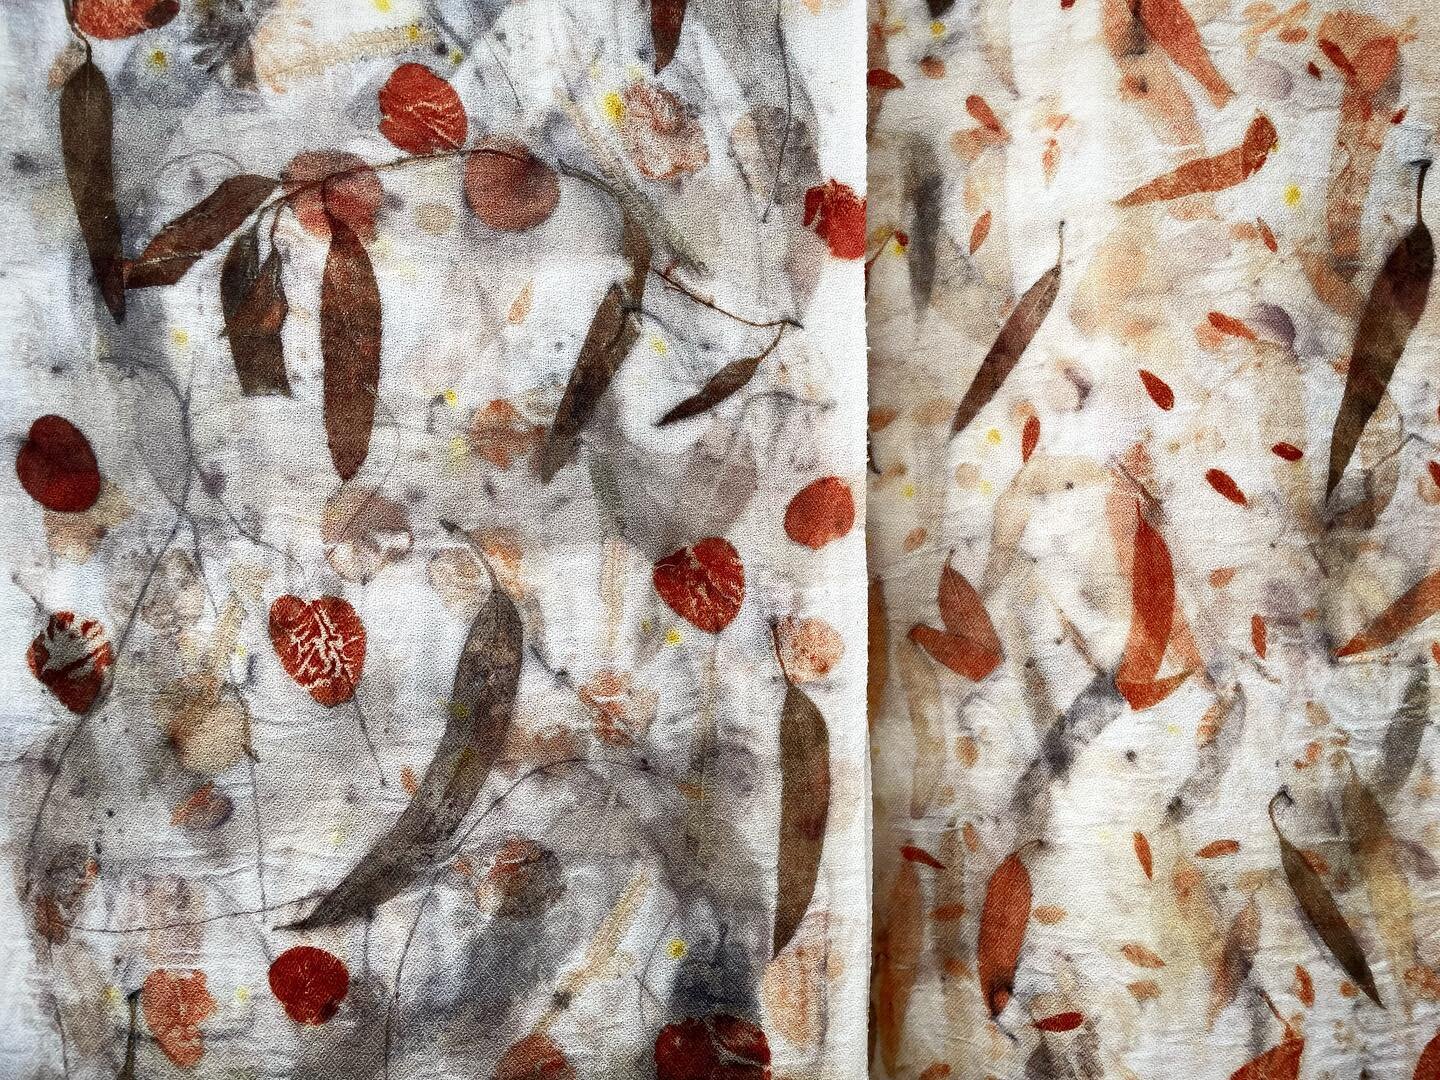 Same same (leaves) but different! This is what I ❤️ about the process. Every piece has its own personality 😍 
The finest Australian merino wool and eucalyptus leaves.

#Leafprint #MyLocalDyePlants #Handcrafted #Botanicaldyes  #AroundTheWorldin80dyes